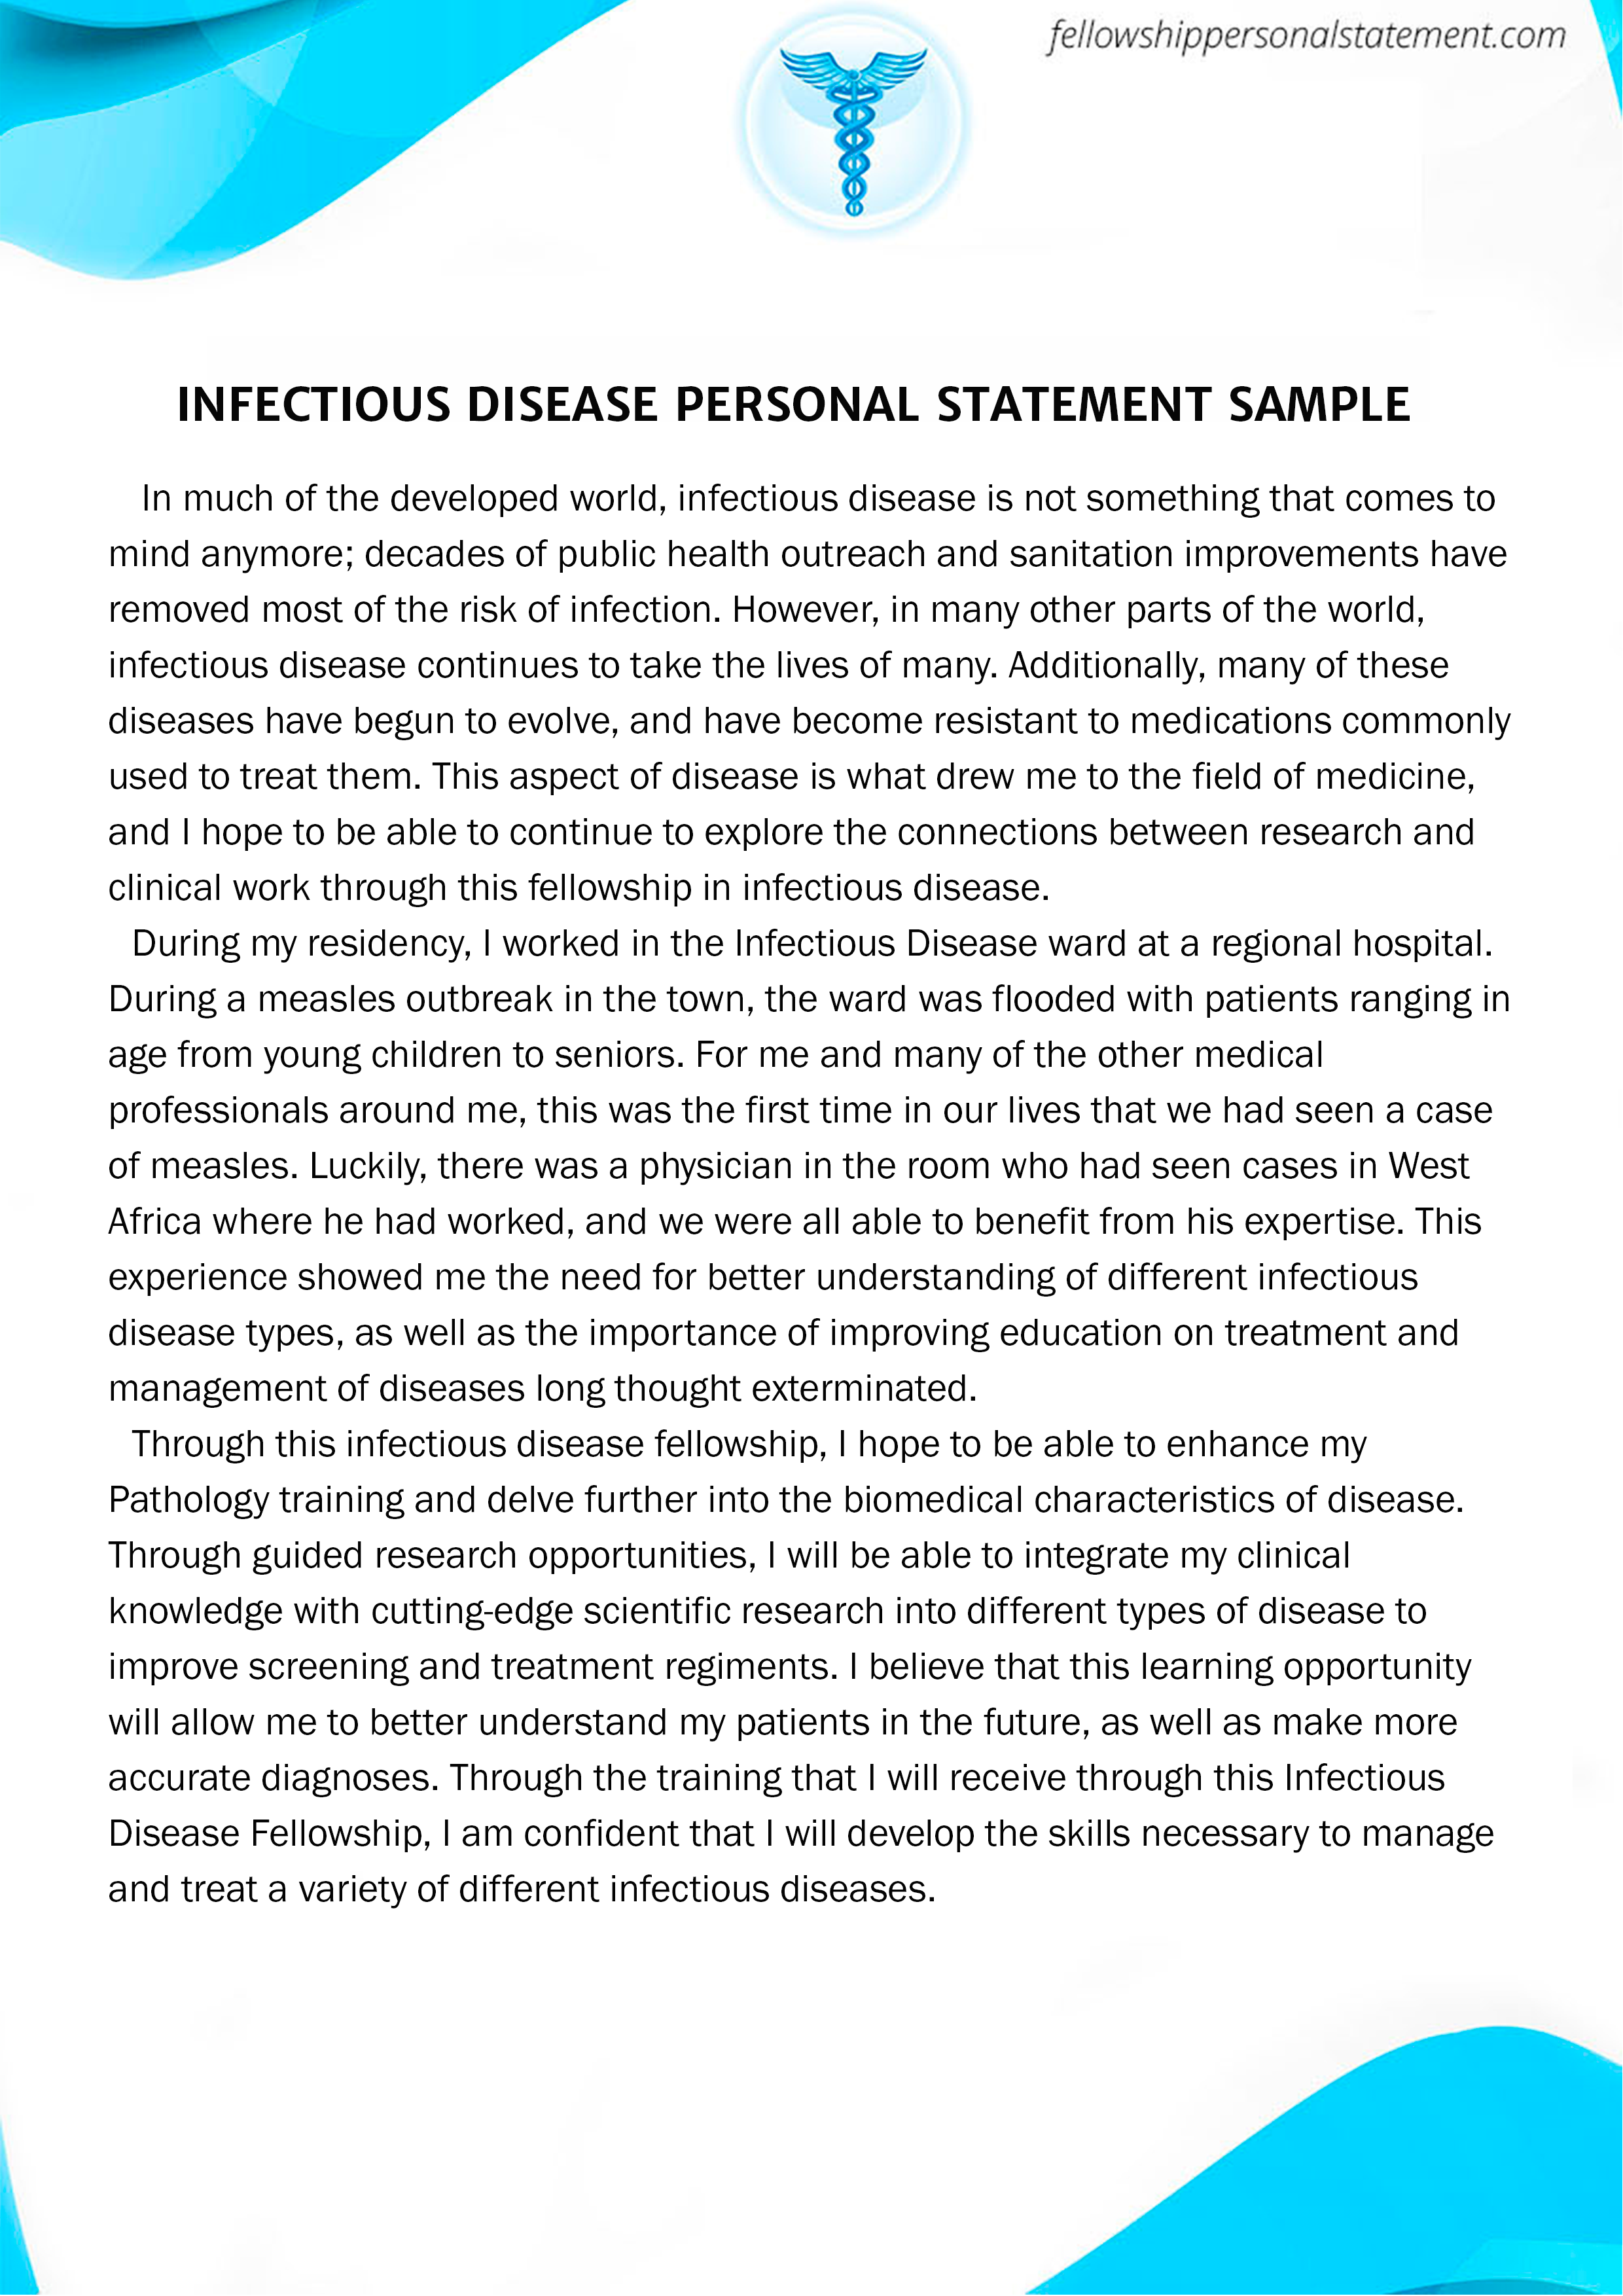 research paper topics for infectious disease